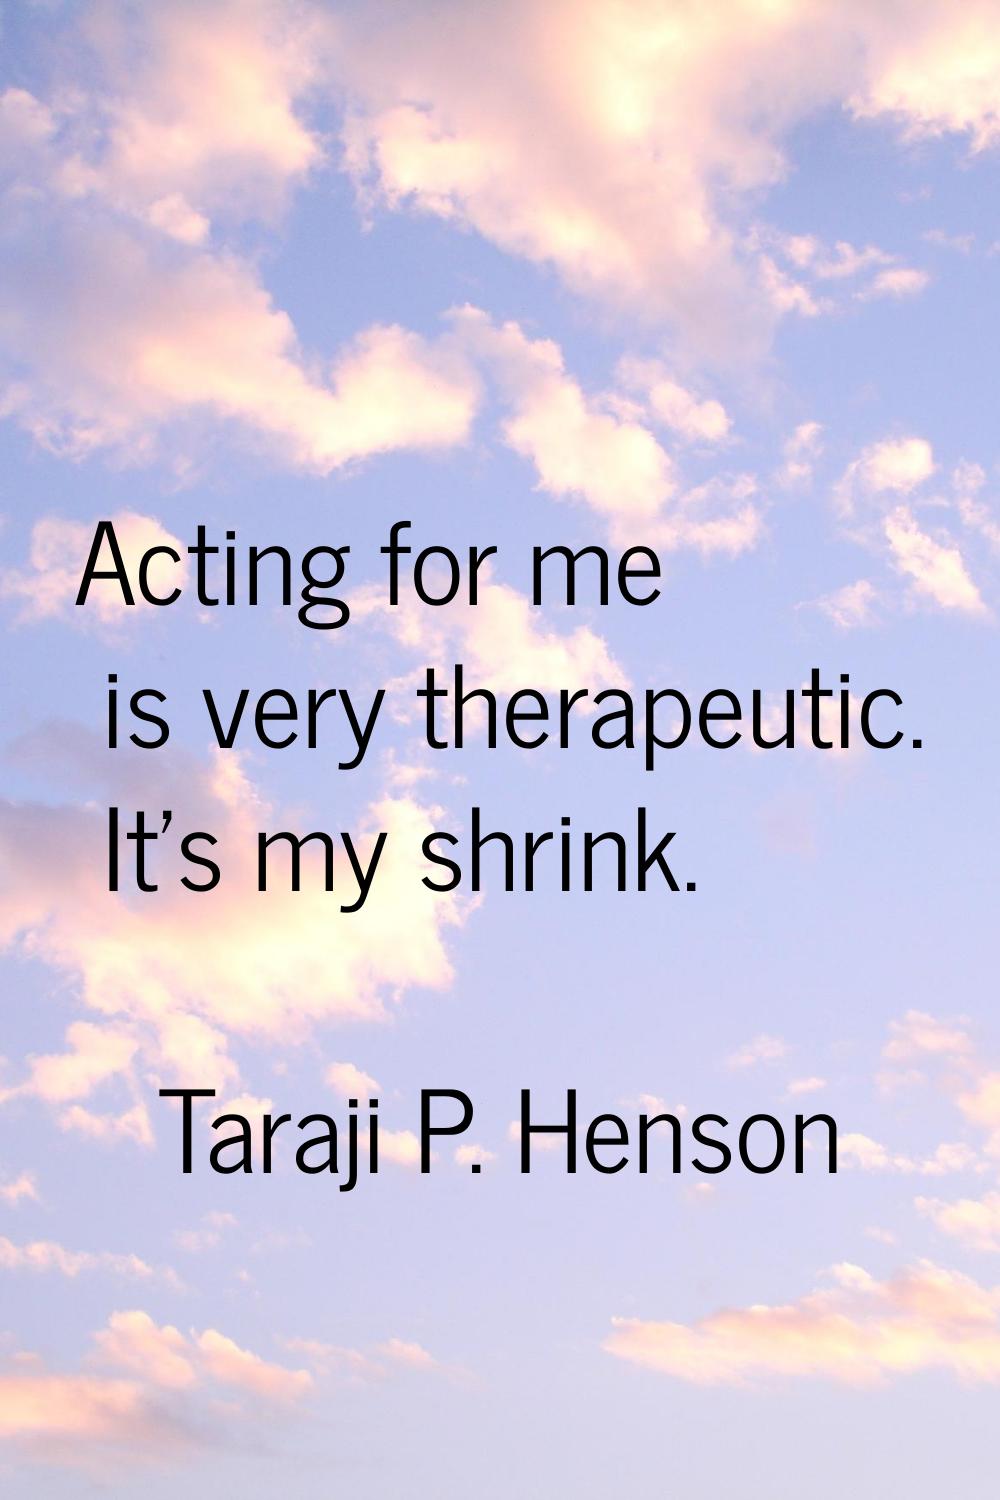 Acting for me is very therapeutic. It's my shrink.